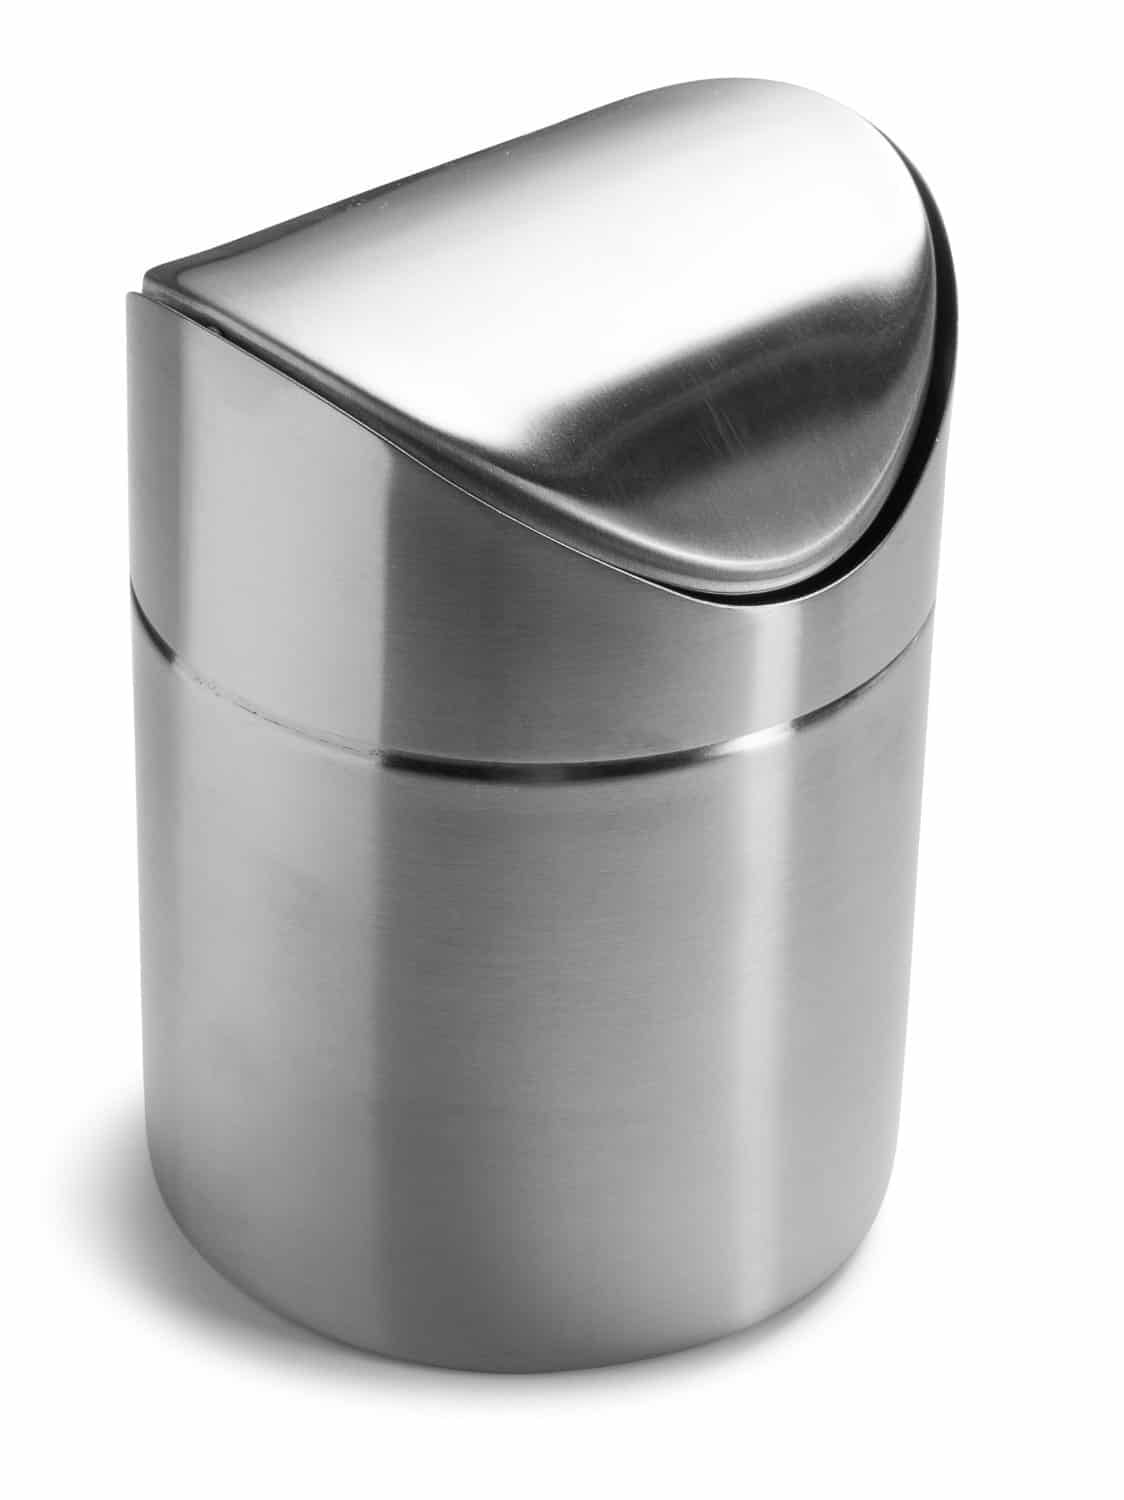 Bedroom Bathroom Use Office TWFRIC Mini Desktop Trash Can for Kitchen Countertop Portable Swing Lid Recycling Stainless Steel Metal Small Waste Bin 